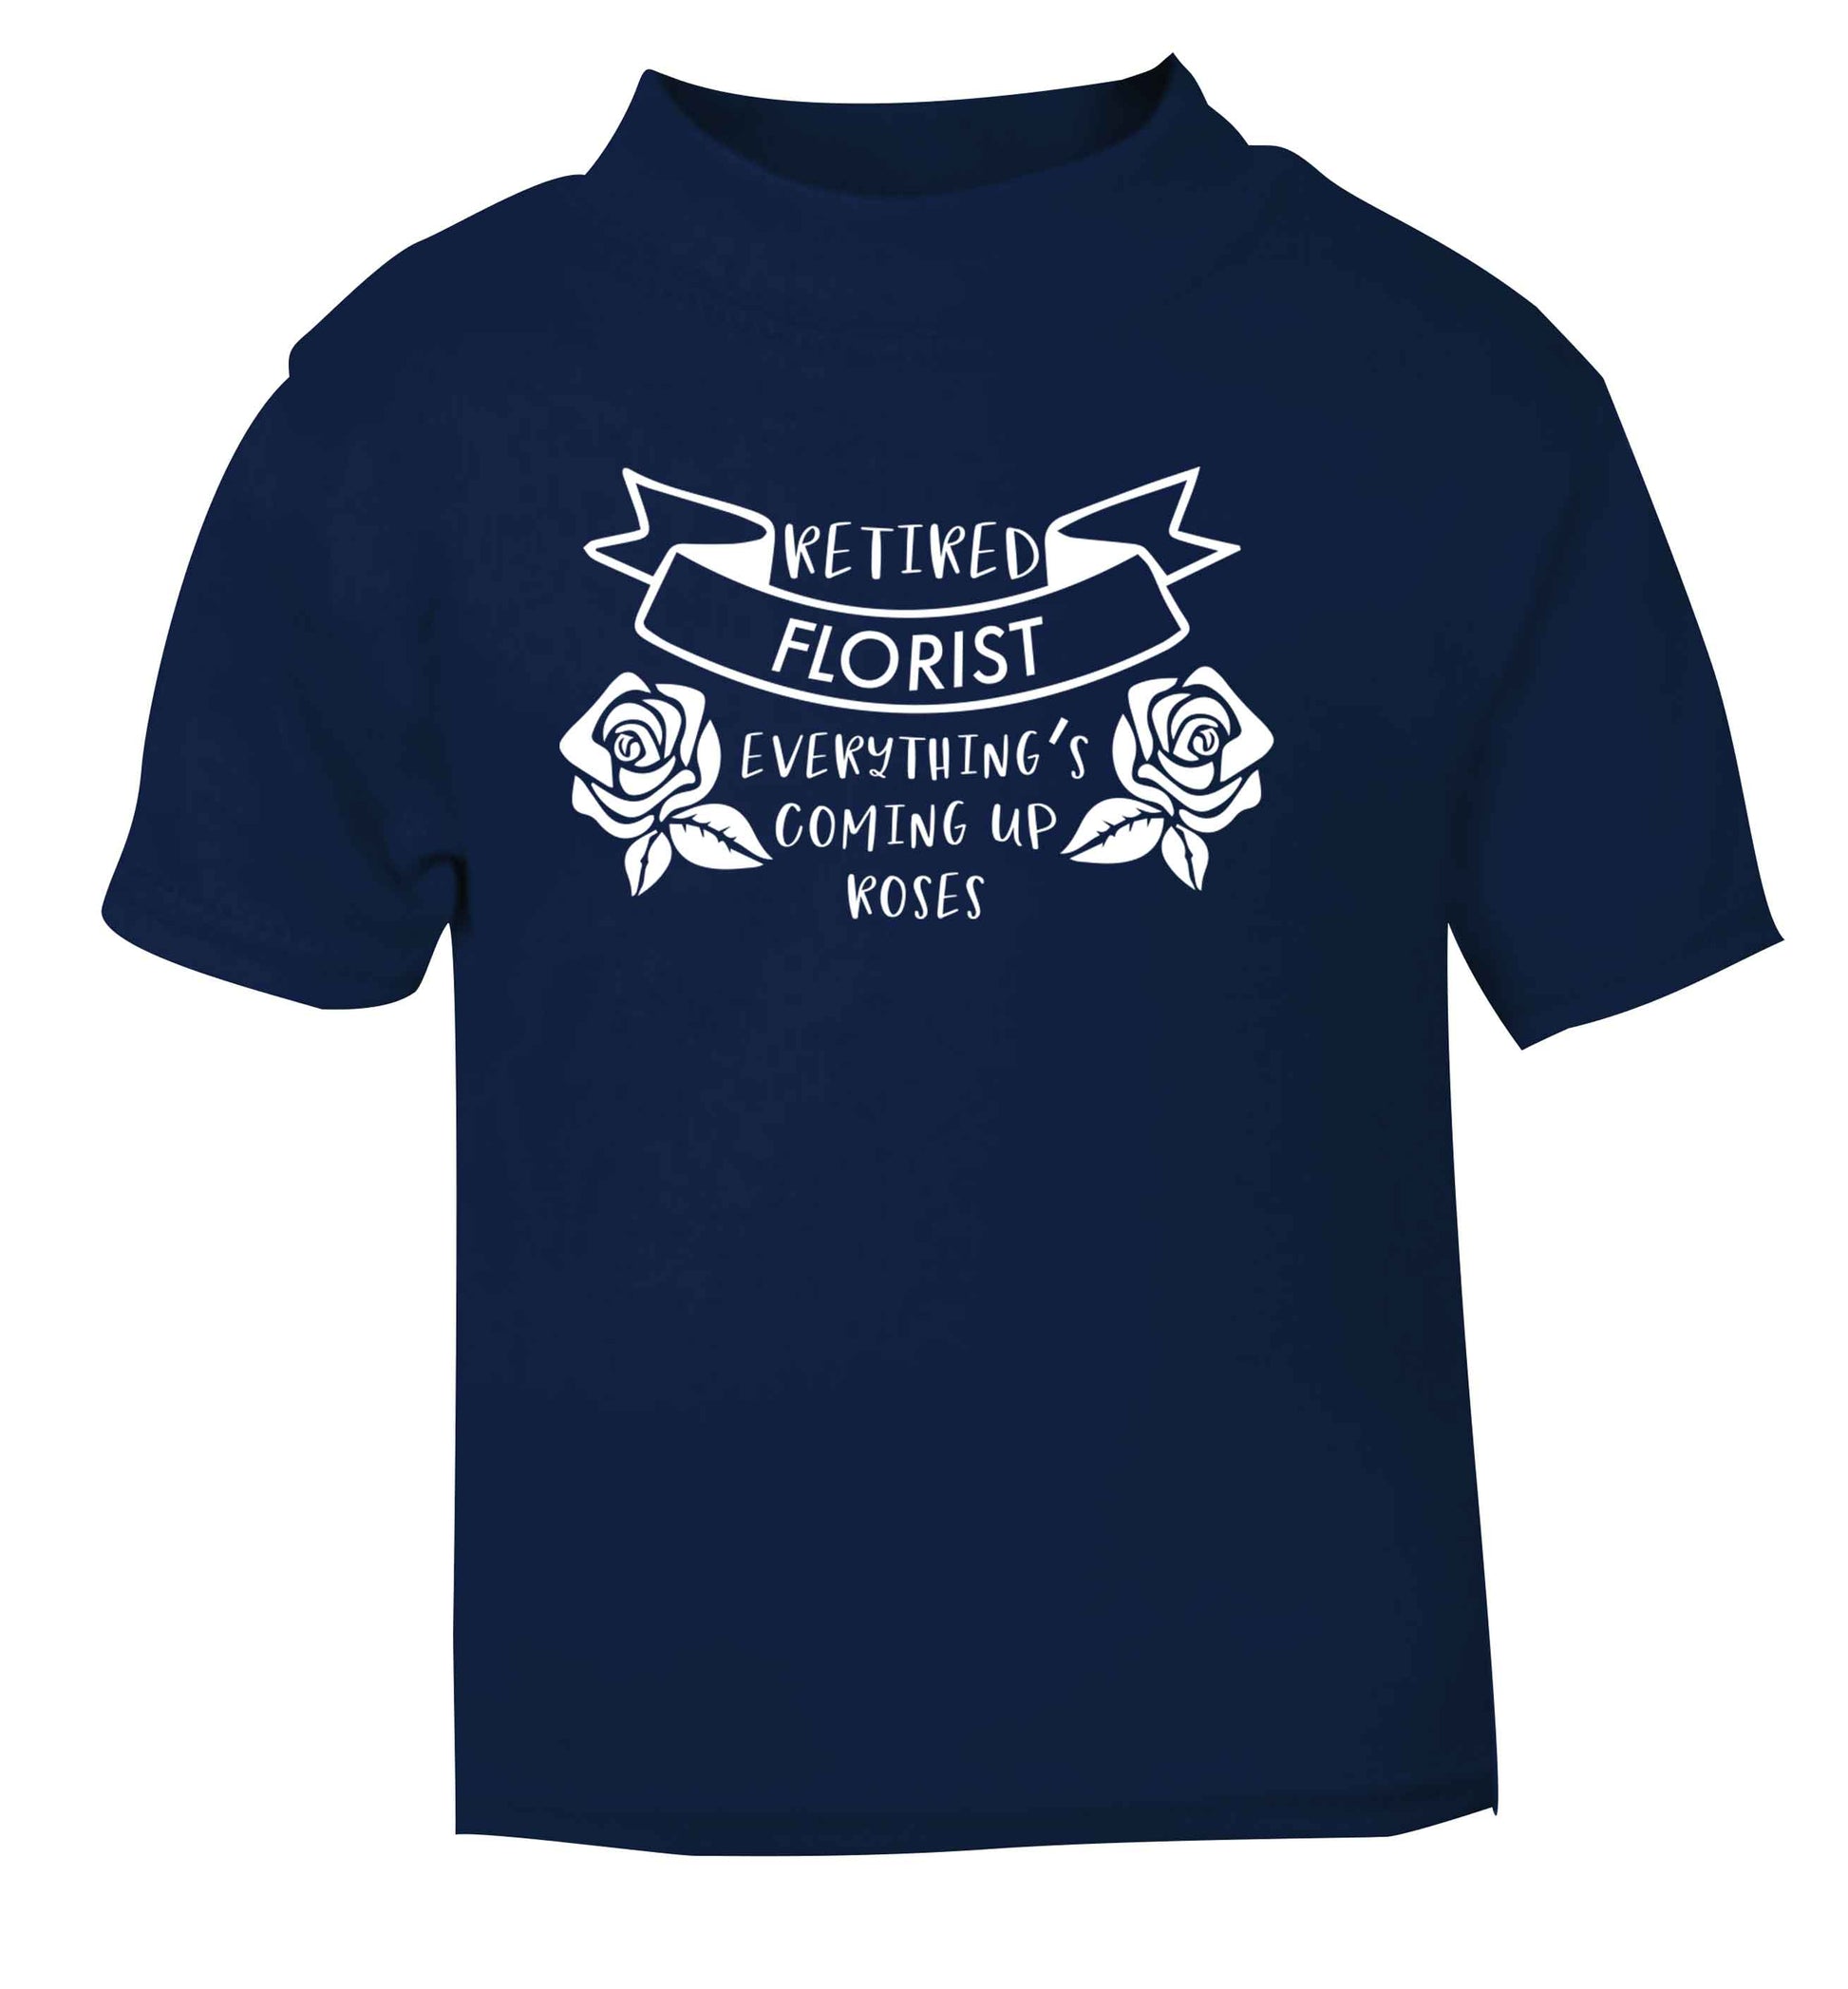 Retired florist everything's coming up roses navy Baby Toddler Tshirt 2 Years